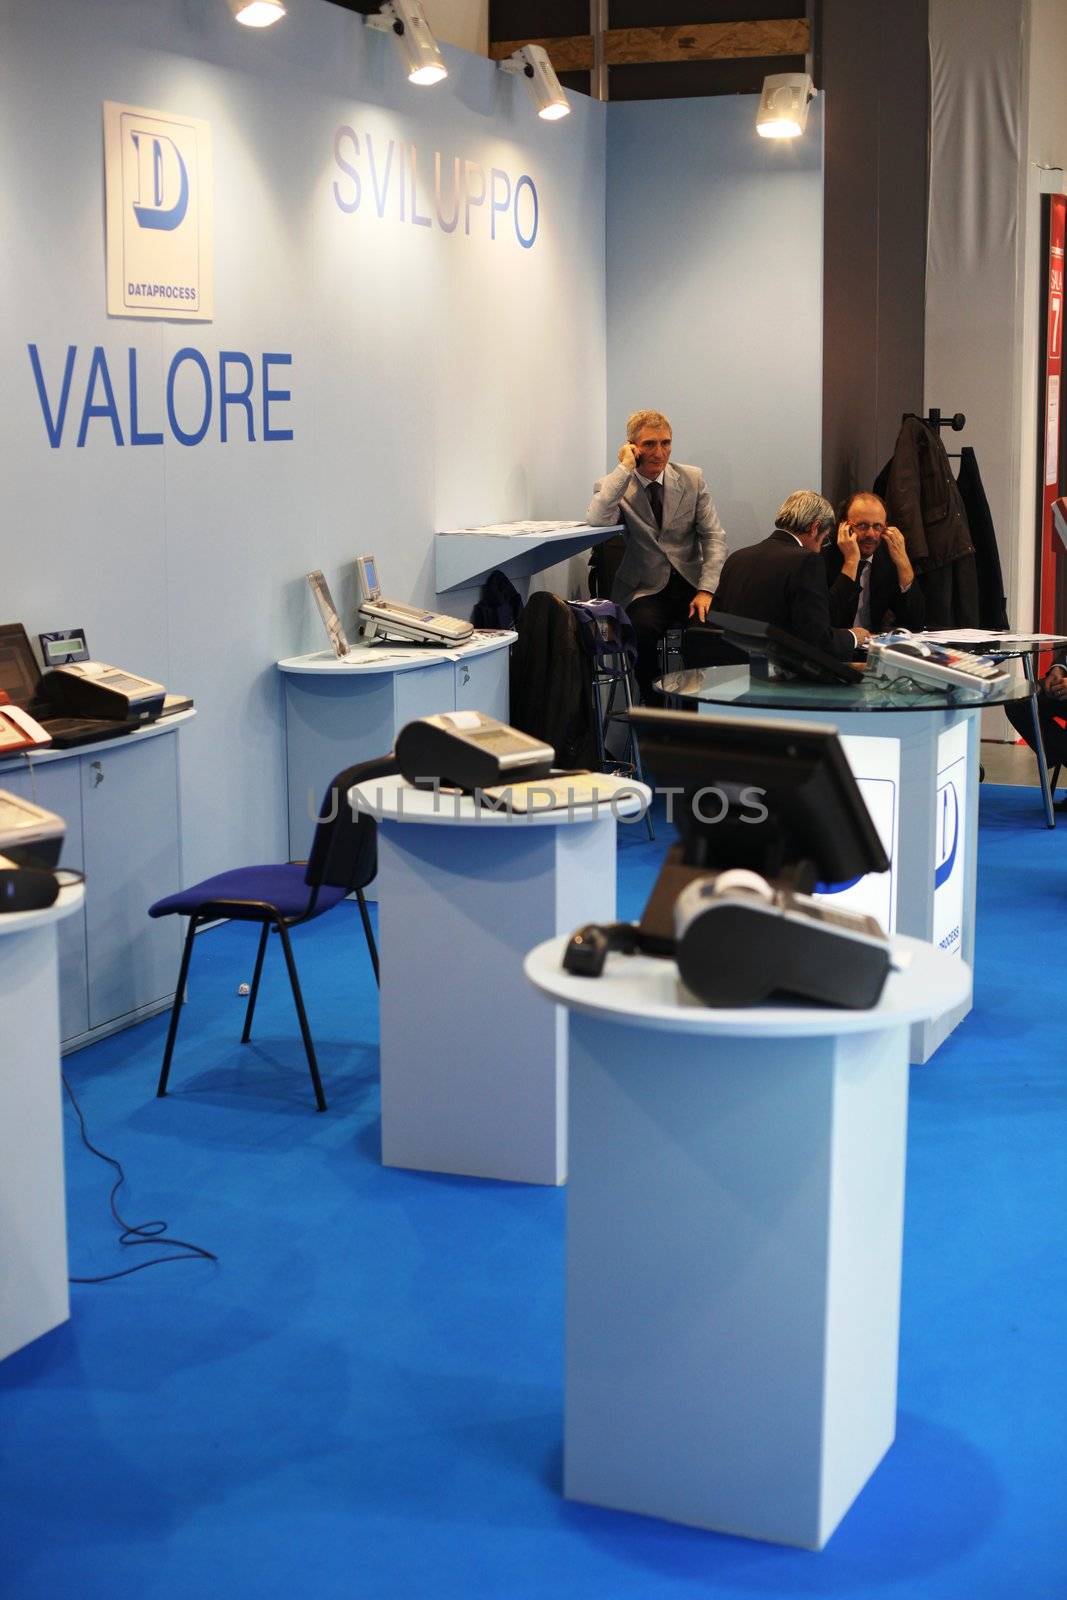 Stand dedicated to cash register technology at Smau, national fair of business intelligence and information technology October 21, 2009 in Milan, Italy.